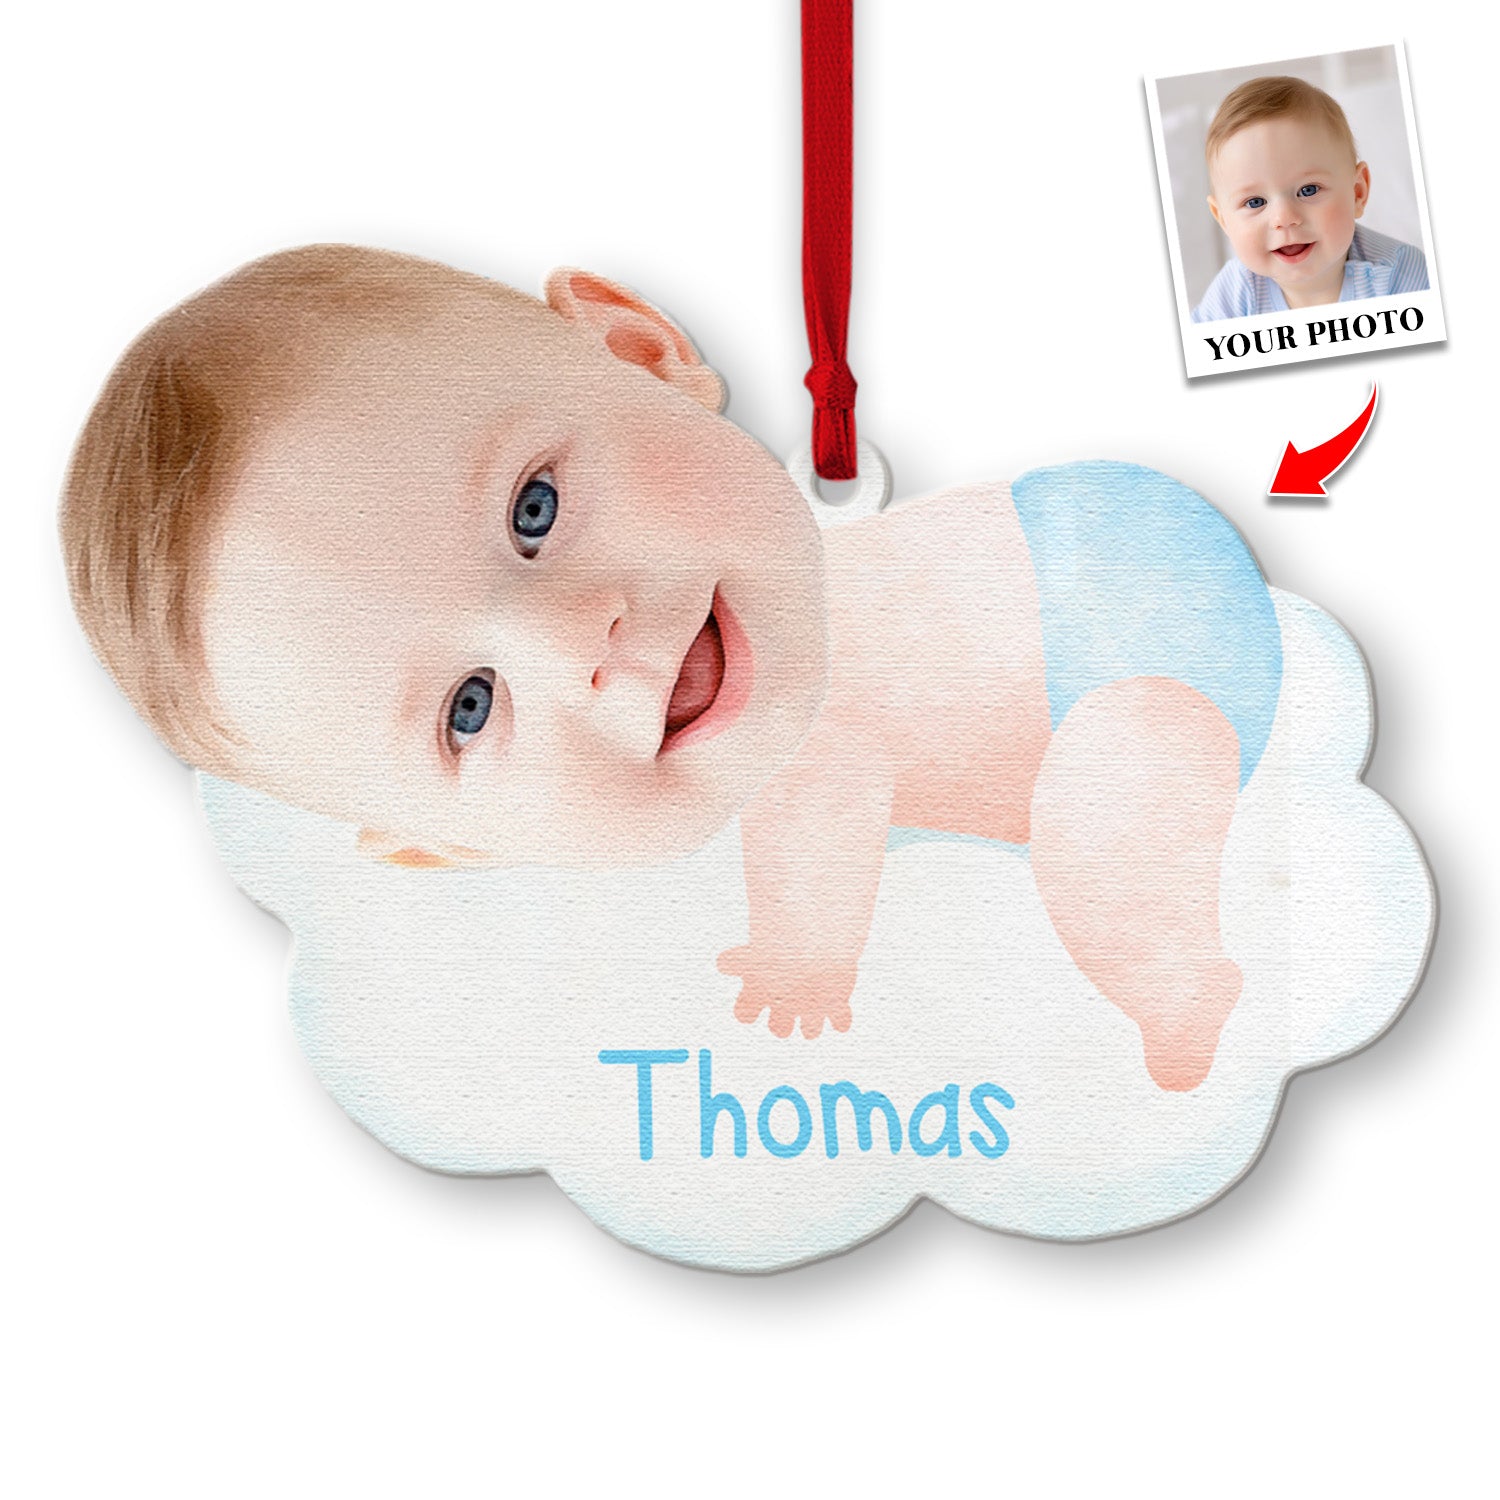 Face From Photo, Ornament For Baby, Hugging Cloud, Personalized Name And Text, Christmas Shape Ornament 2 Sides